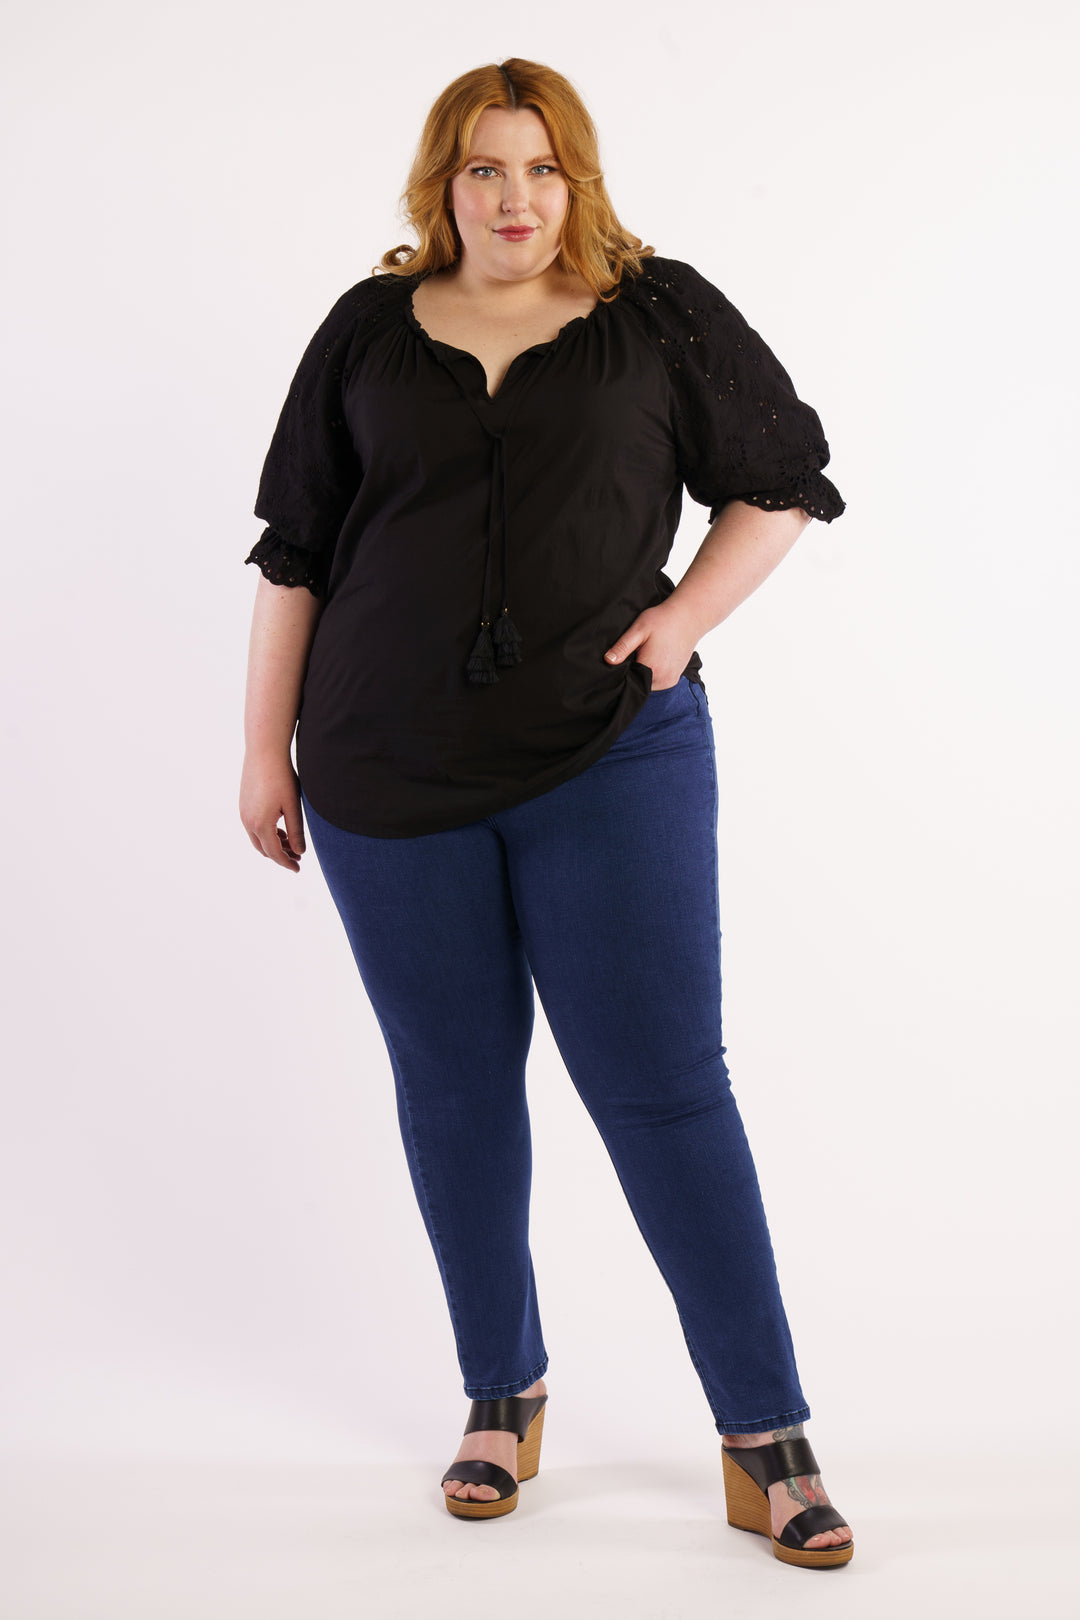 Summer Breeze Broidery Blouse - Black - STOCK AVAILABLE - XS (12/14) & S (14/16)